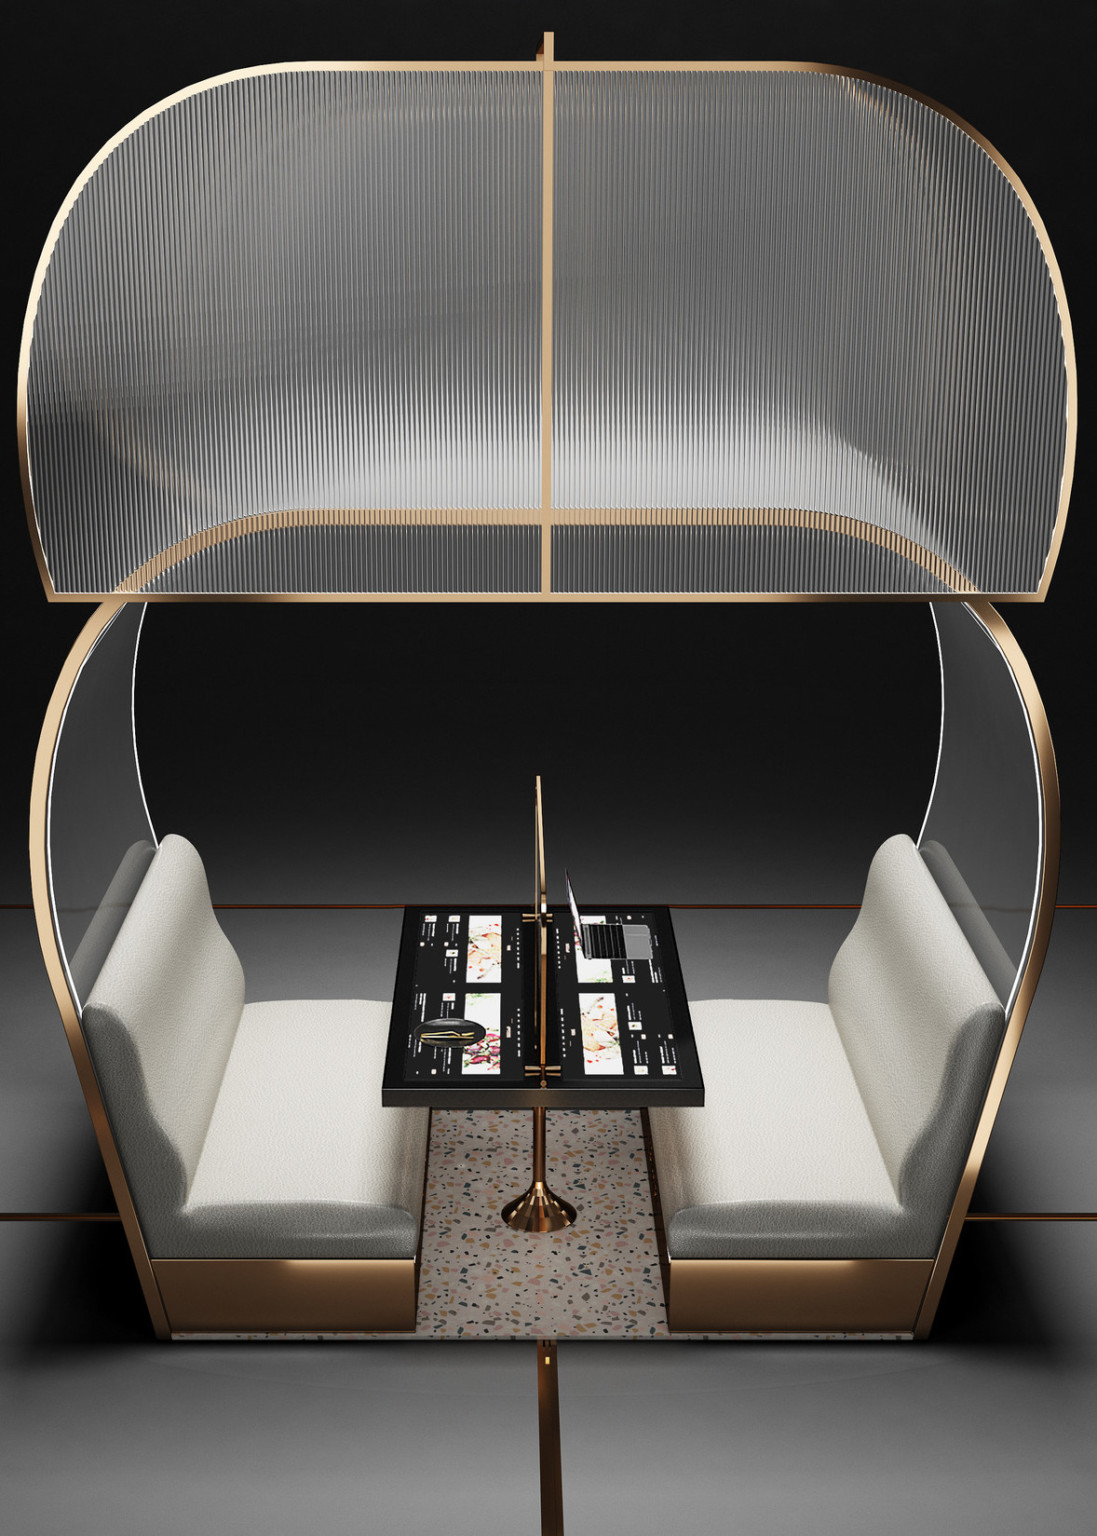 White and gold booth with rounded canopy. Ribbed, translucent side walls are raised, with view of black table with partition